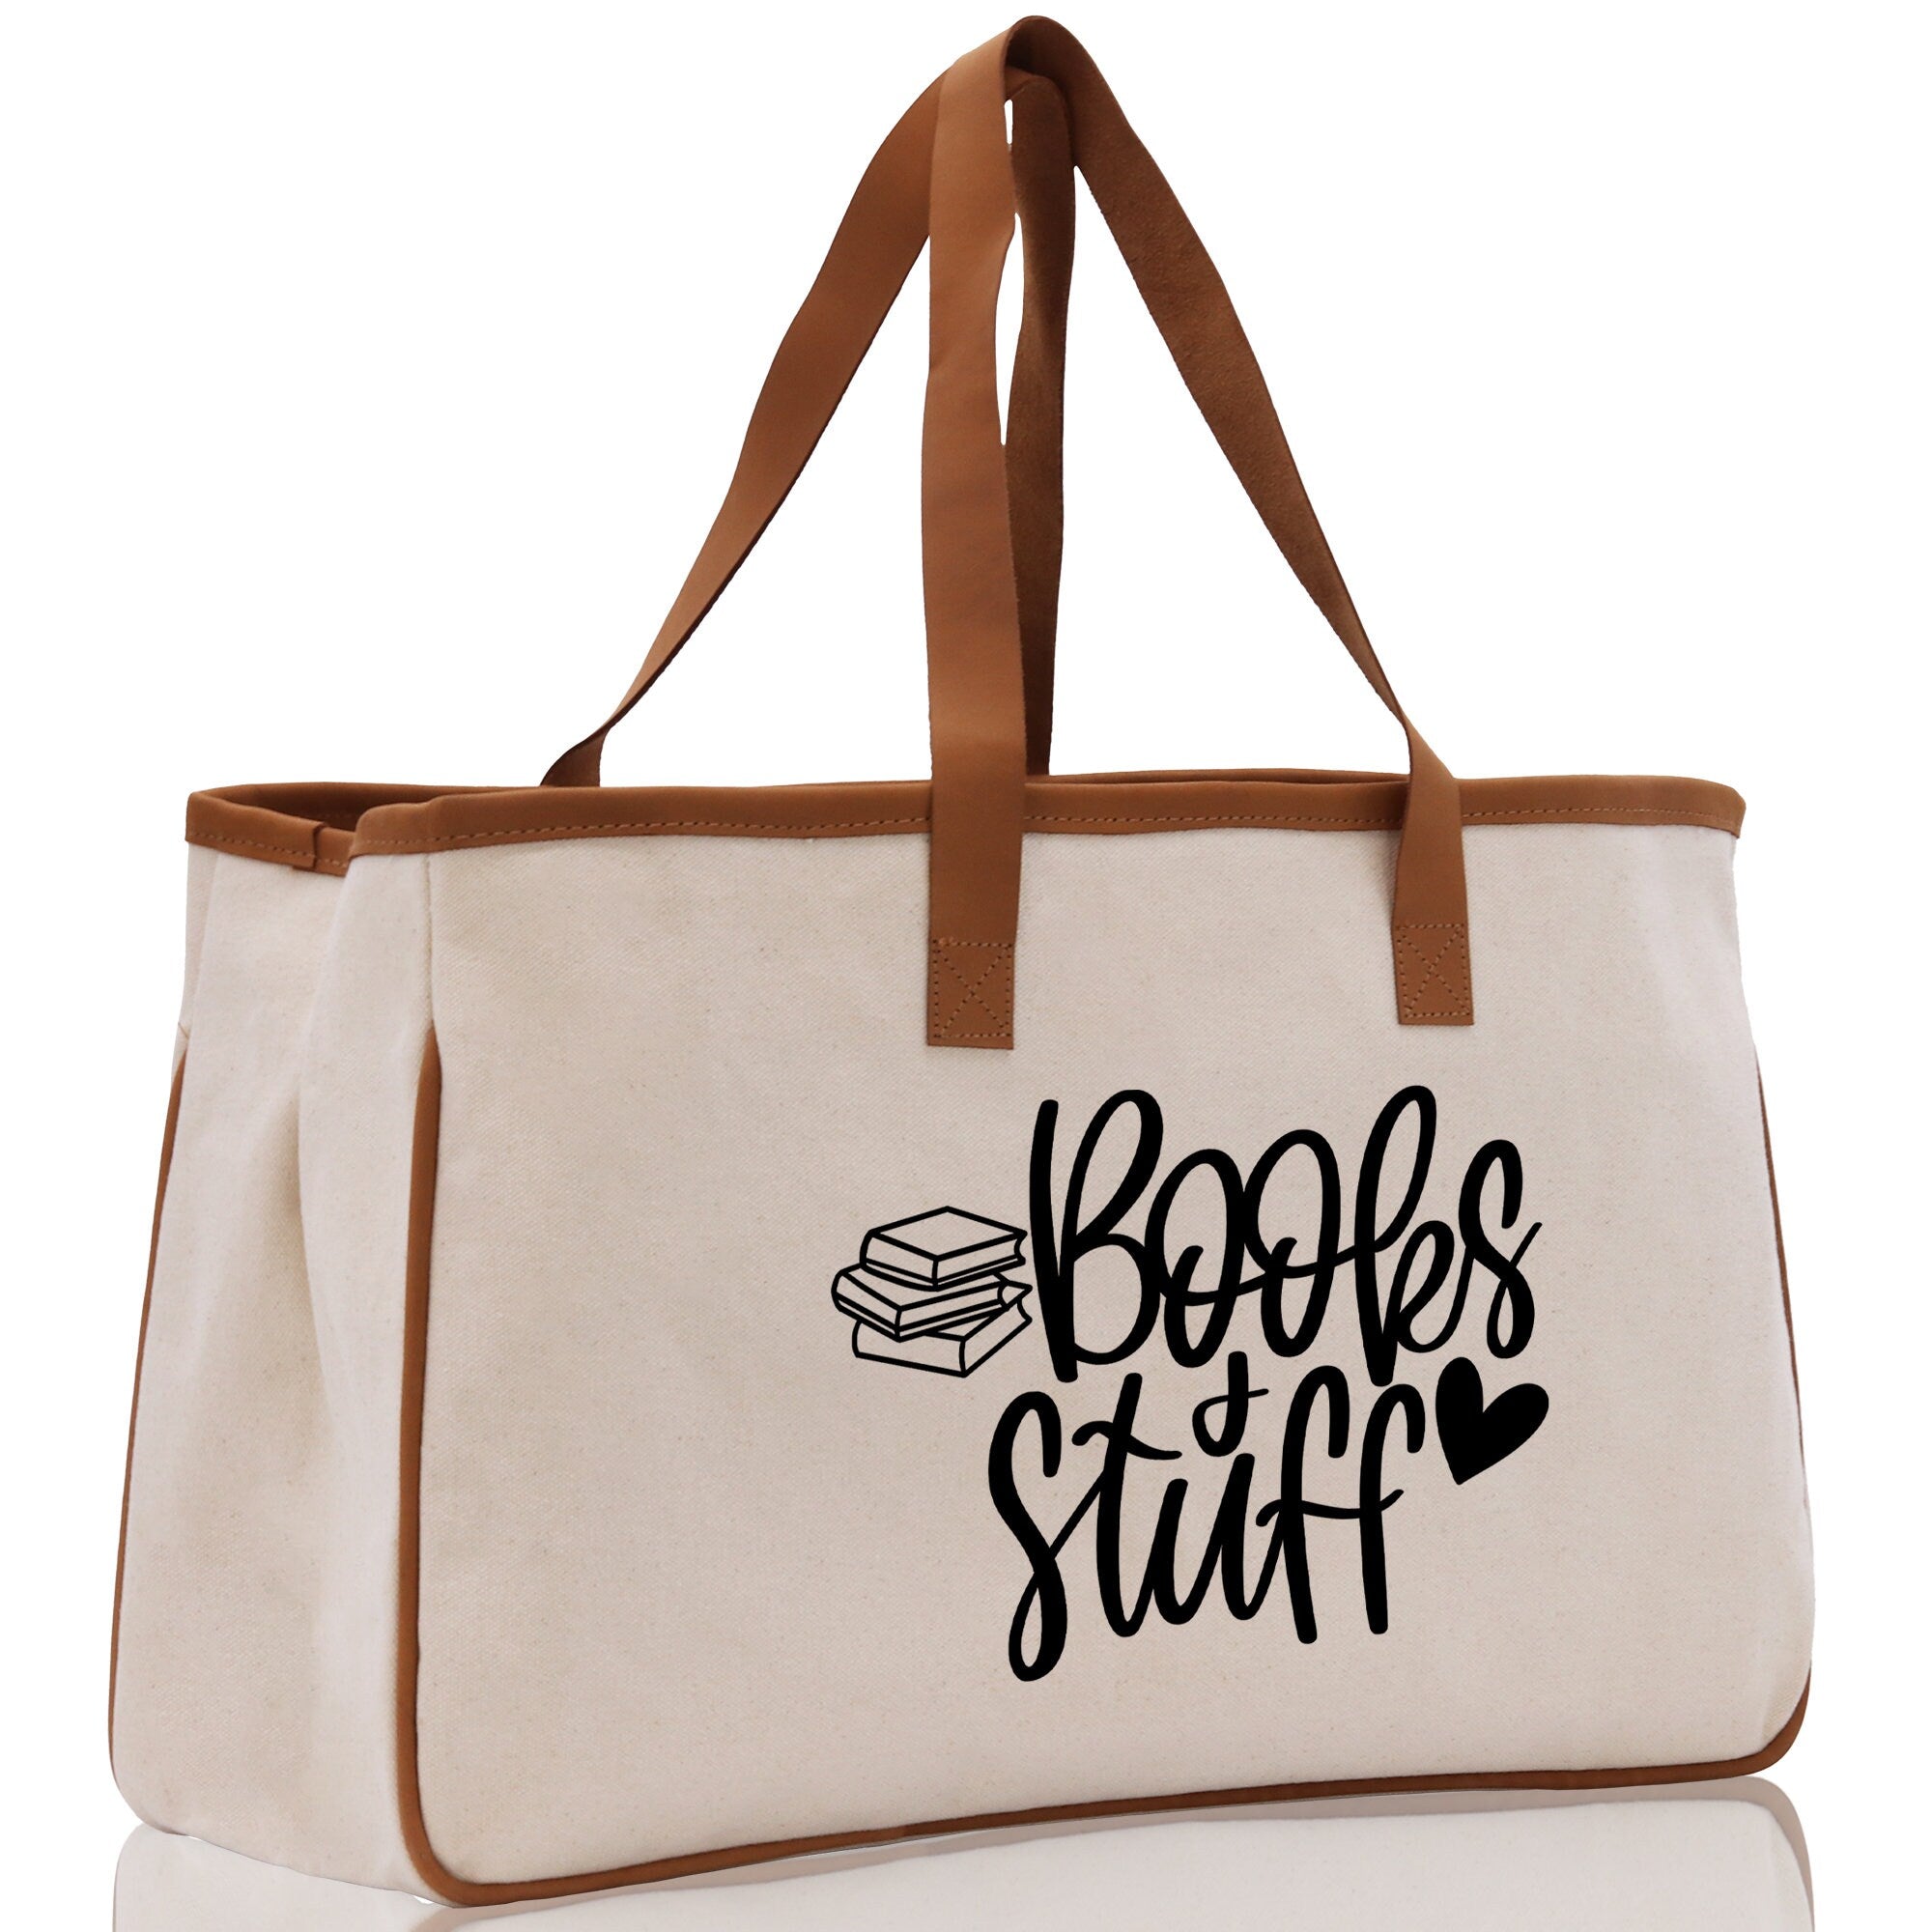 Books Stuff Tote Bag Bookworm Gift Book Quotes Party Gift Book Lover Tote Book Canvas Tote Bag Birthday Gift Library Bag Grocery Bag